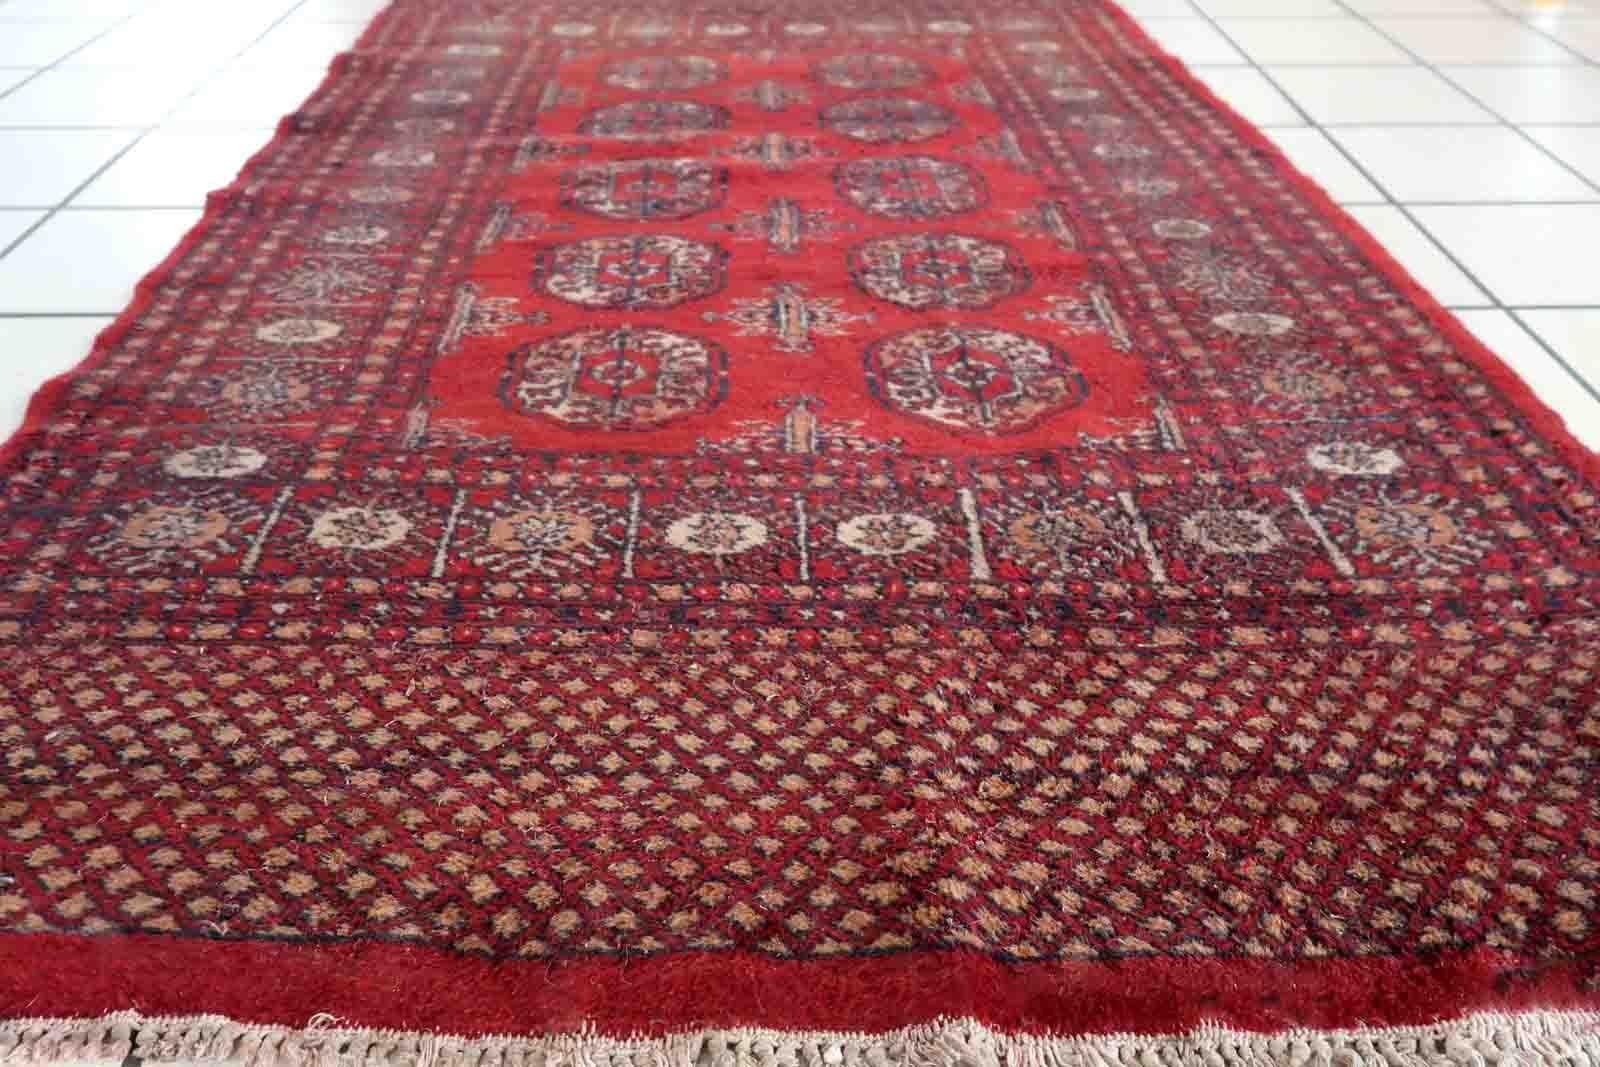 Handmade vintage Uzbek Bukhara rug in bright red color. The rug is from the end of 20th century in good condition, it has some signs of age and old restorations.

-condition: good, some signs of age and old restorations,

-circa: